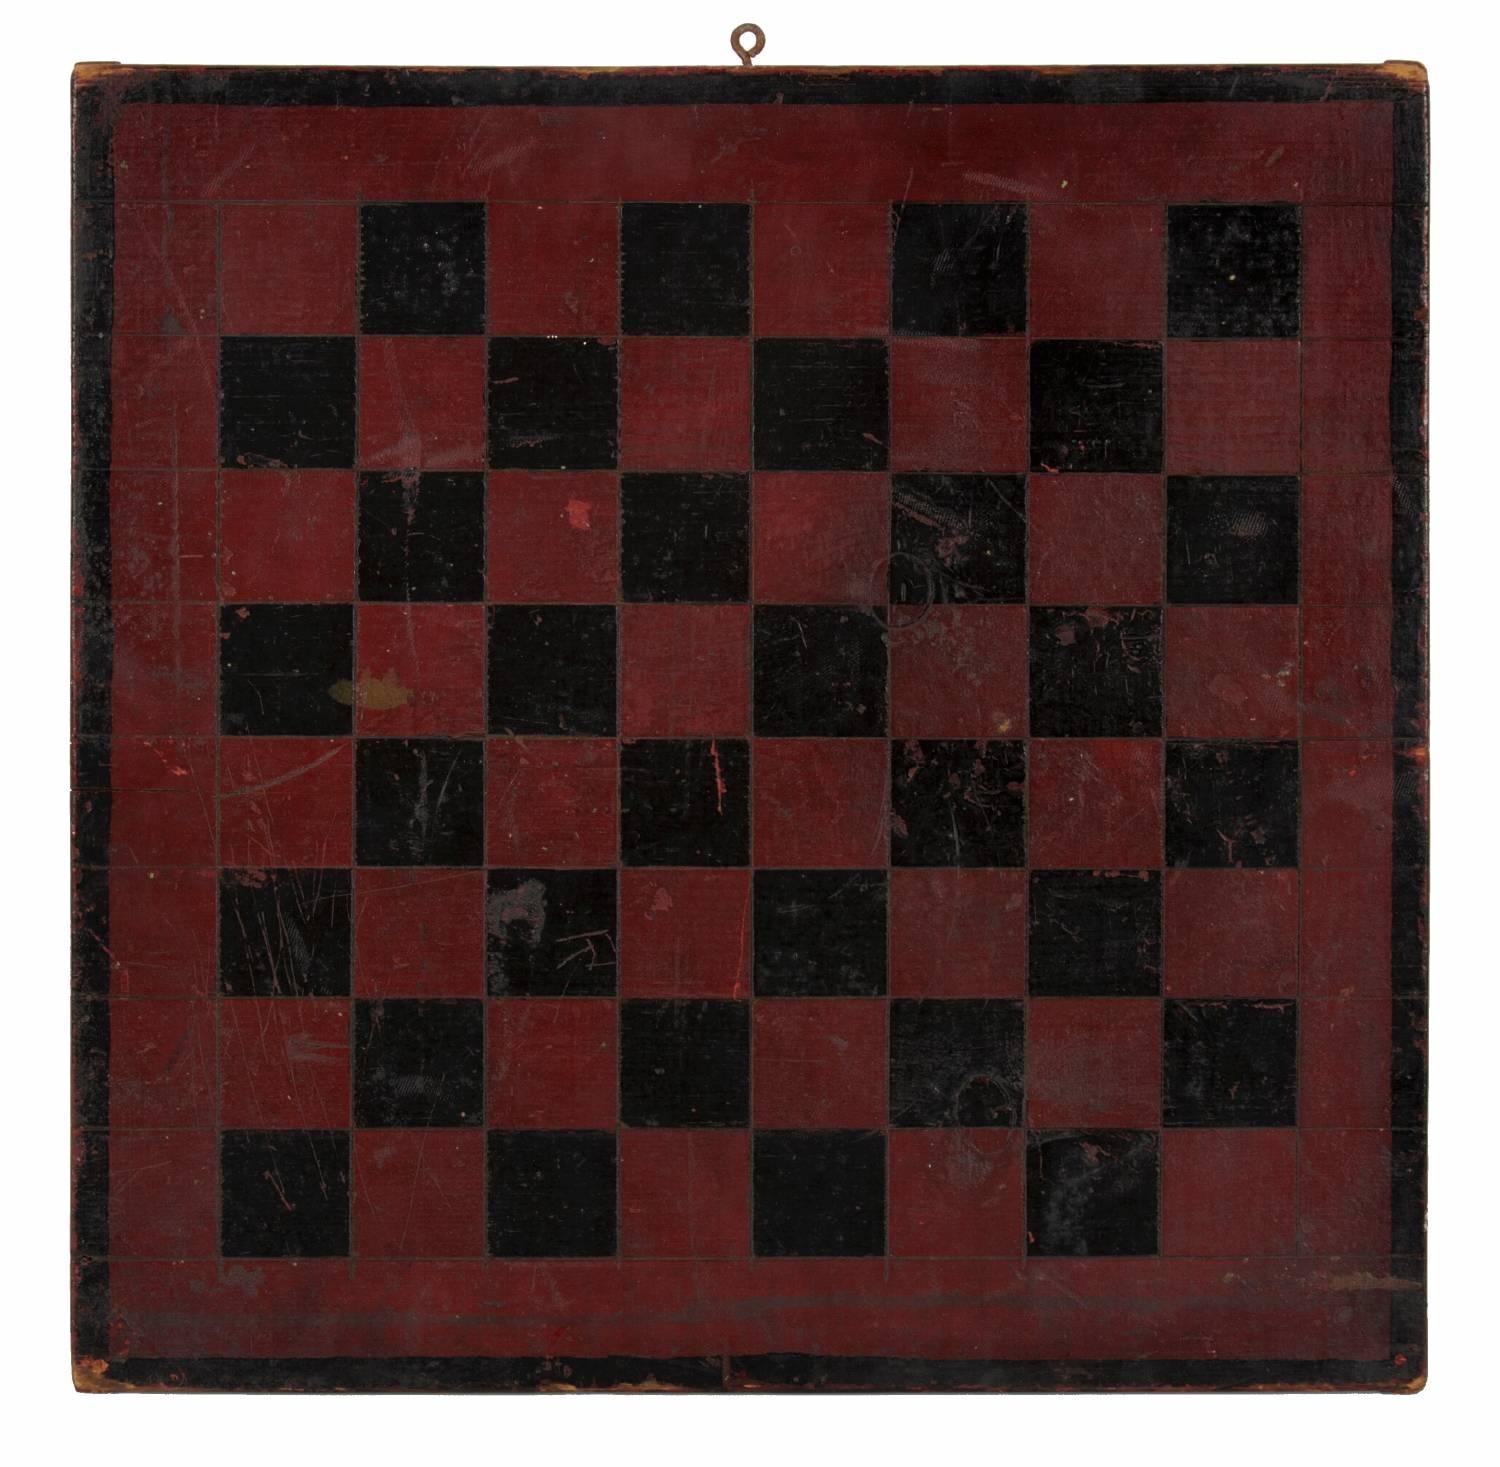 AMERICAN PARCHEESI BOARD WITH GREAT POLYCHROME PAINTED SURFACE IN CRIMSON RED AND BLACK, CA 1870 

Painted 19th century, American game board with Parcheesi on the front and checkers on the reverse. The surface is satin polychrome in crimson red and